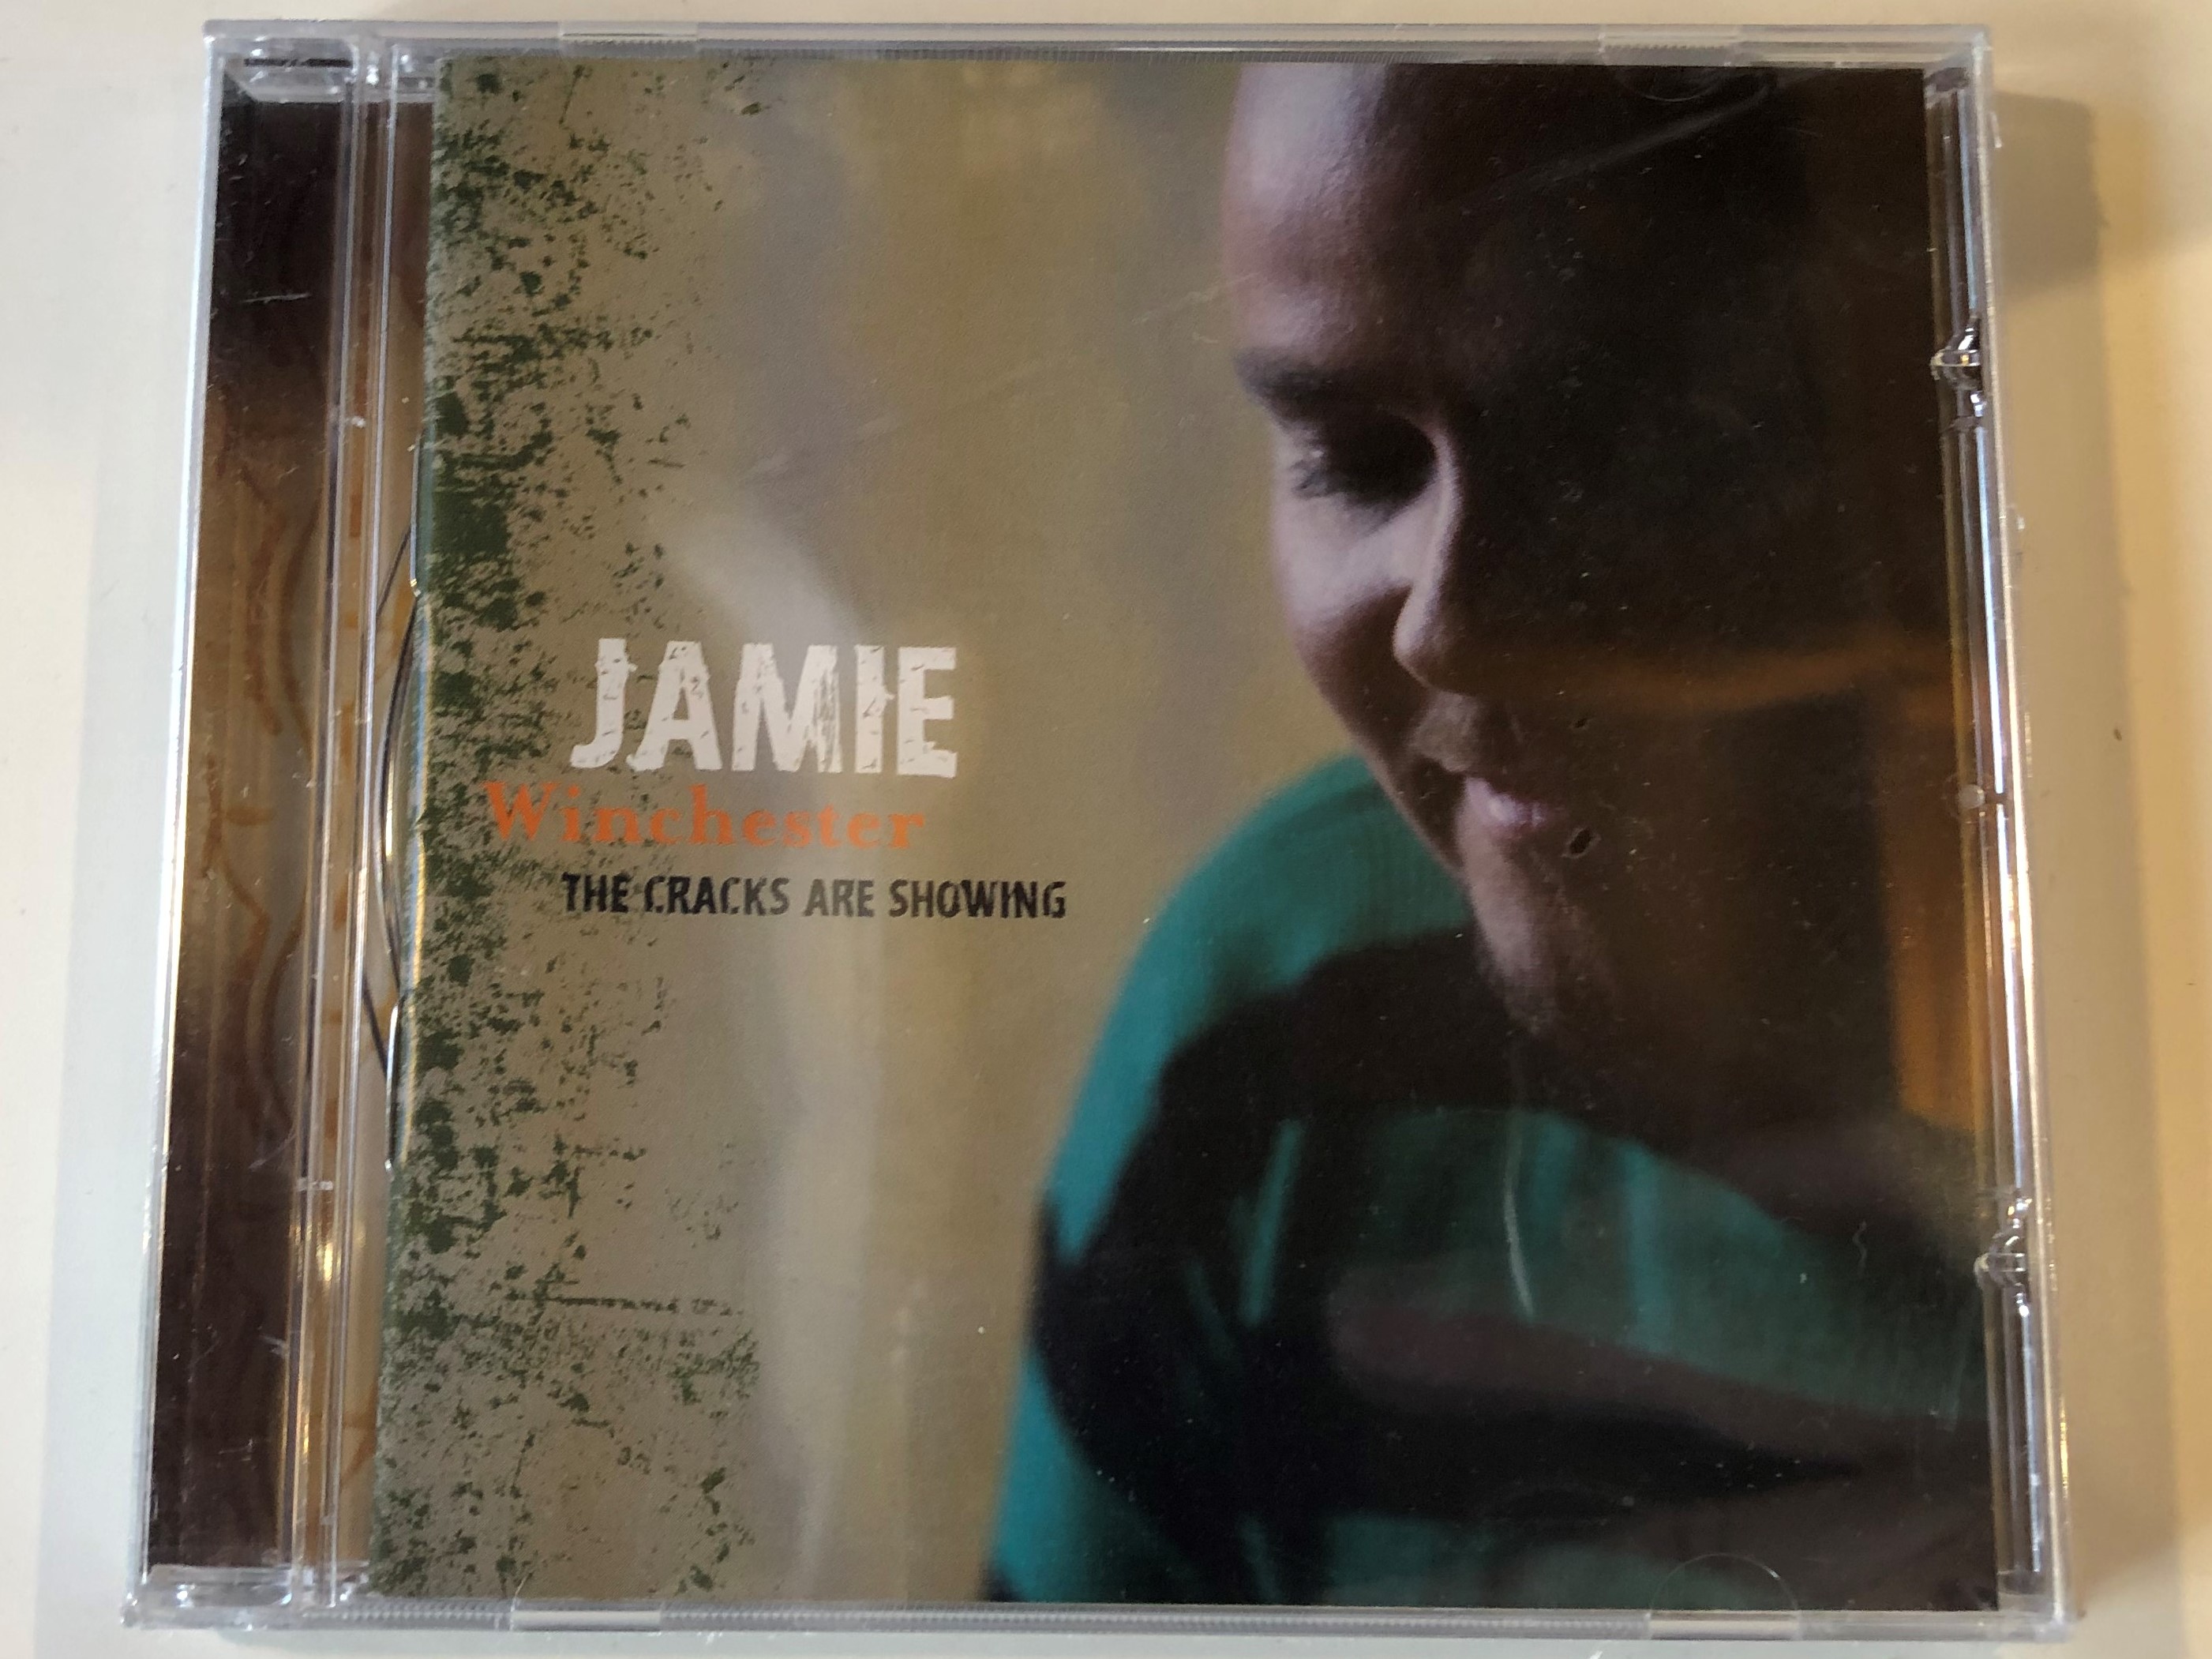 jamie-winchester-the-cracks-are-showing-label360-audio-cd-2009-5999558010065-1-.jpg